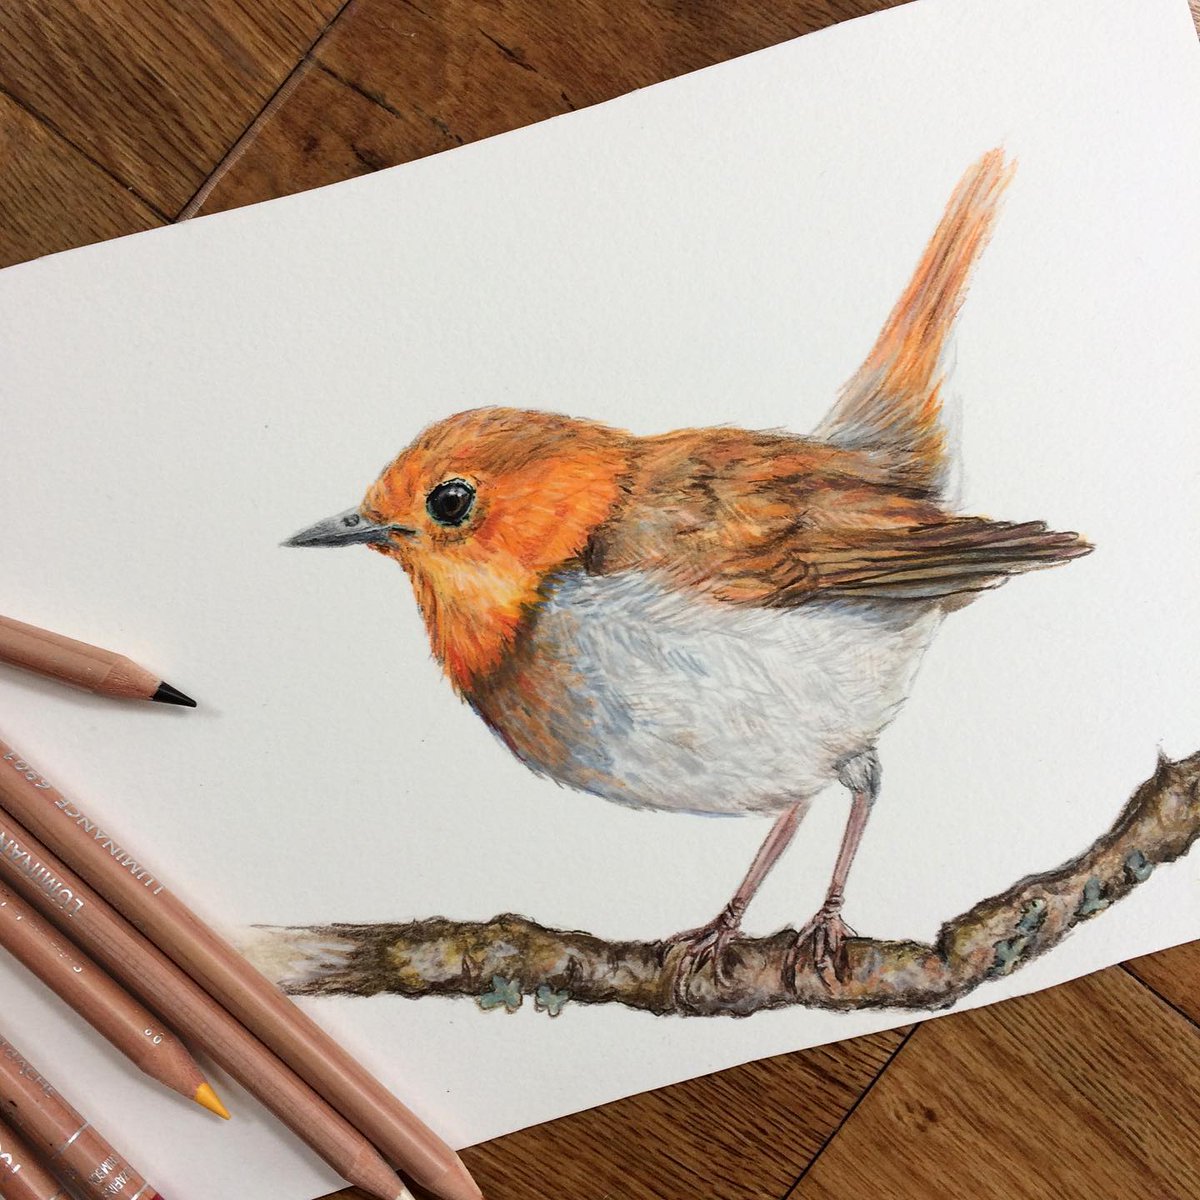 For my first official tweet it felt appropriate to share some recent bird illustrations I have been working on! They were all drawn with #carandacheluminance pencils on #rivesbfk paper :-) #art #twitterart #illustrationart #birds #britishwildlife #nature #lovenature